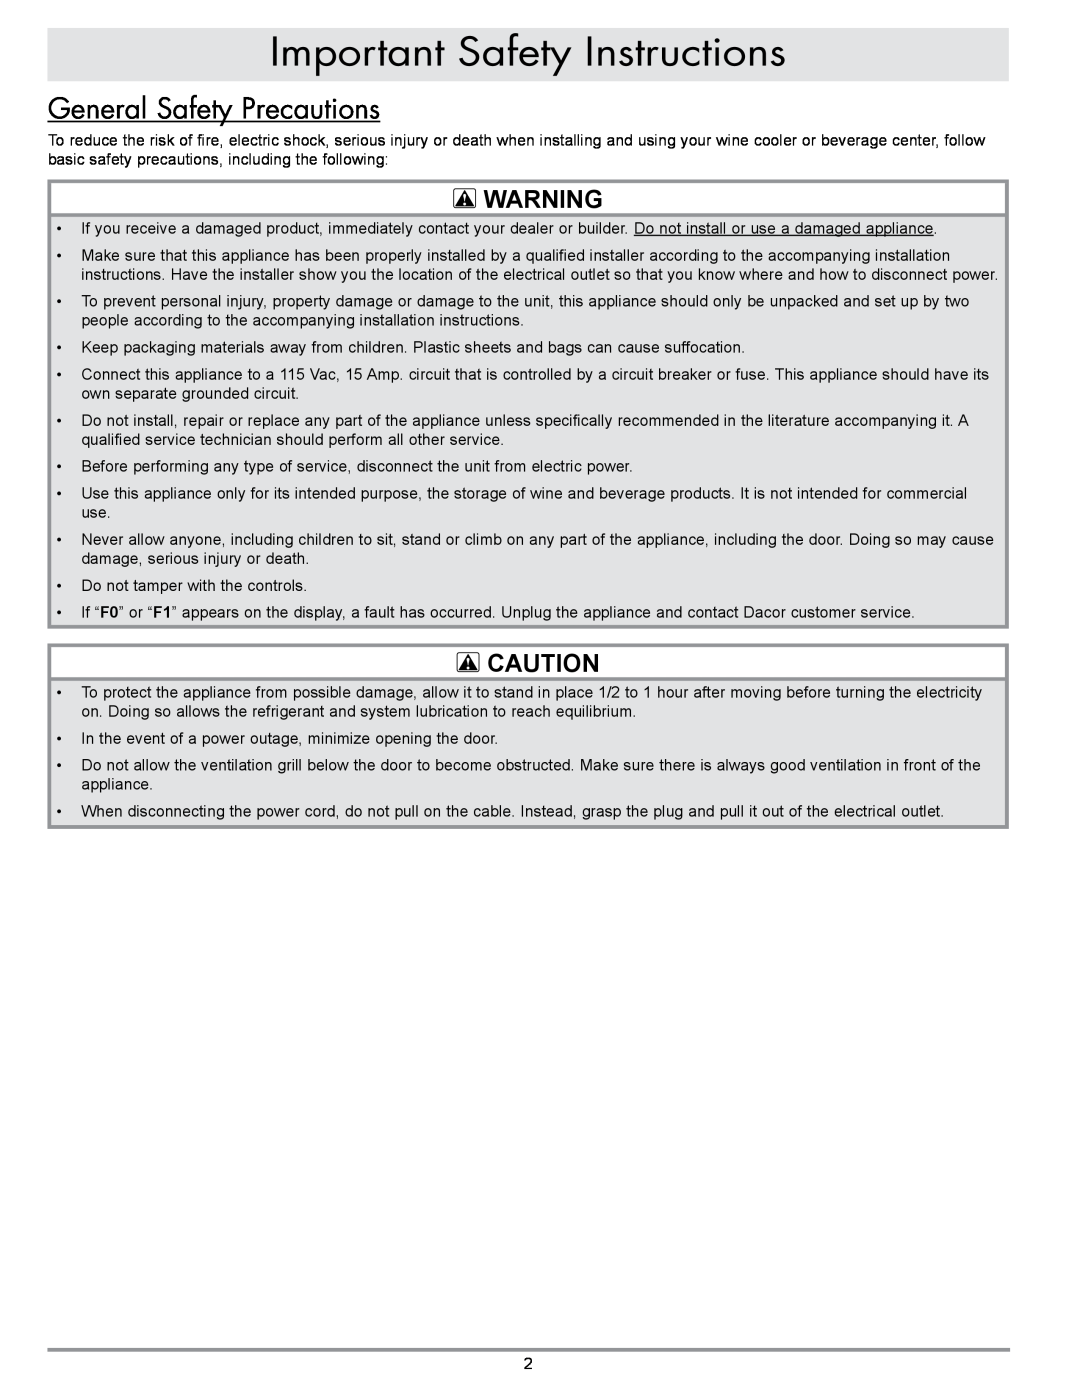 Dacor EF24RWCZ1SS, EF24RBCSS, EF24LBCSS, EF24LWCZ1SS General Safety Precautions, Important Safety Instructions 